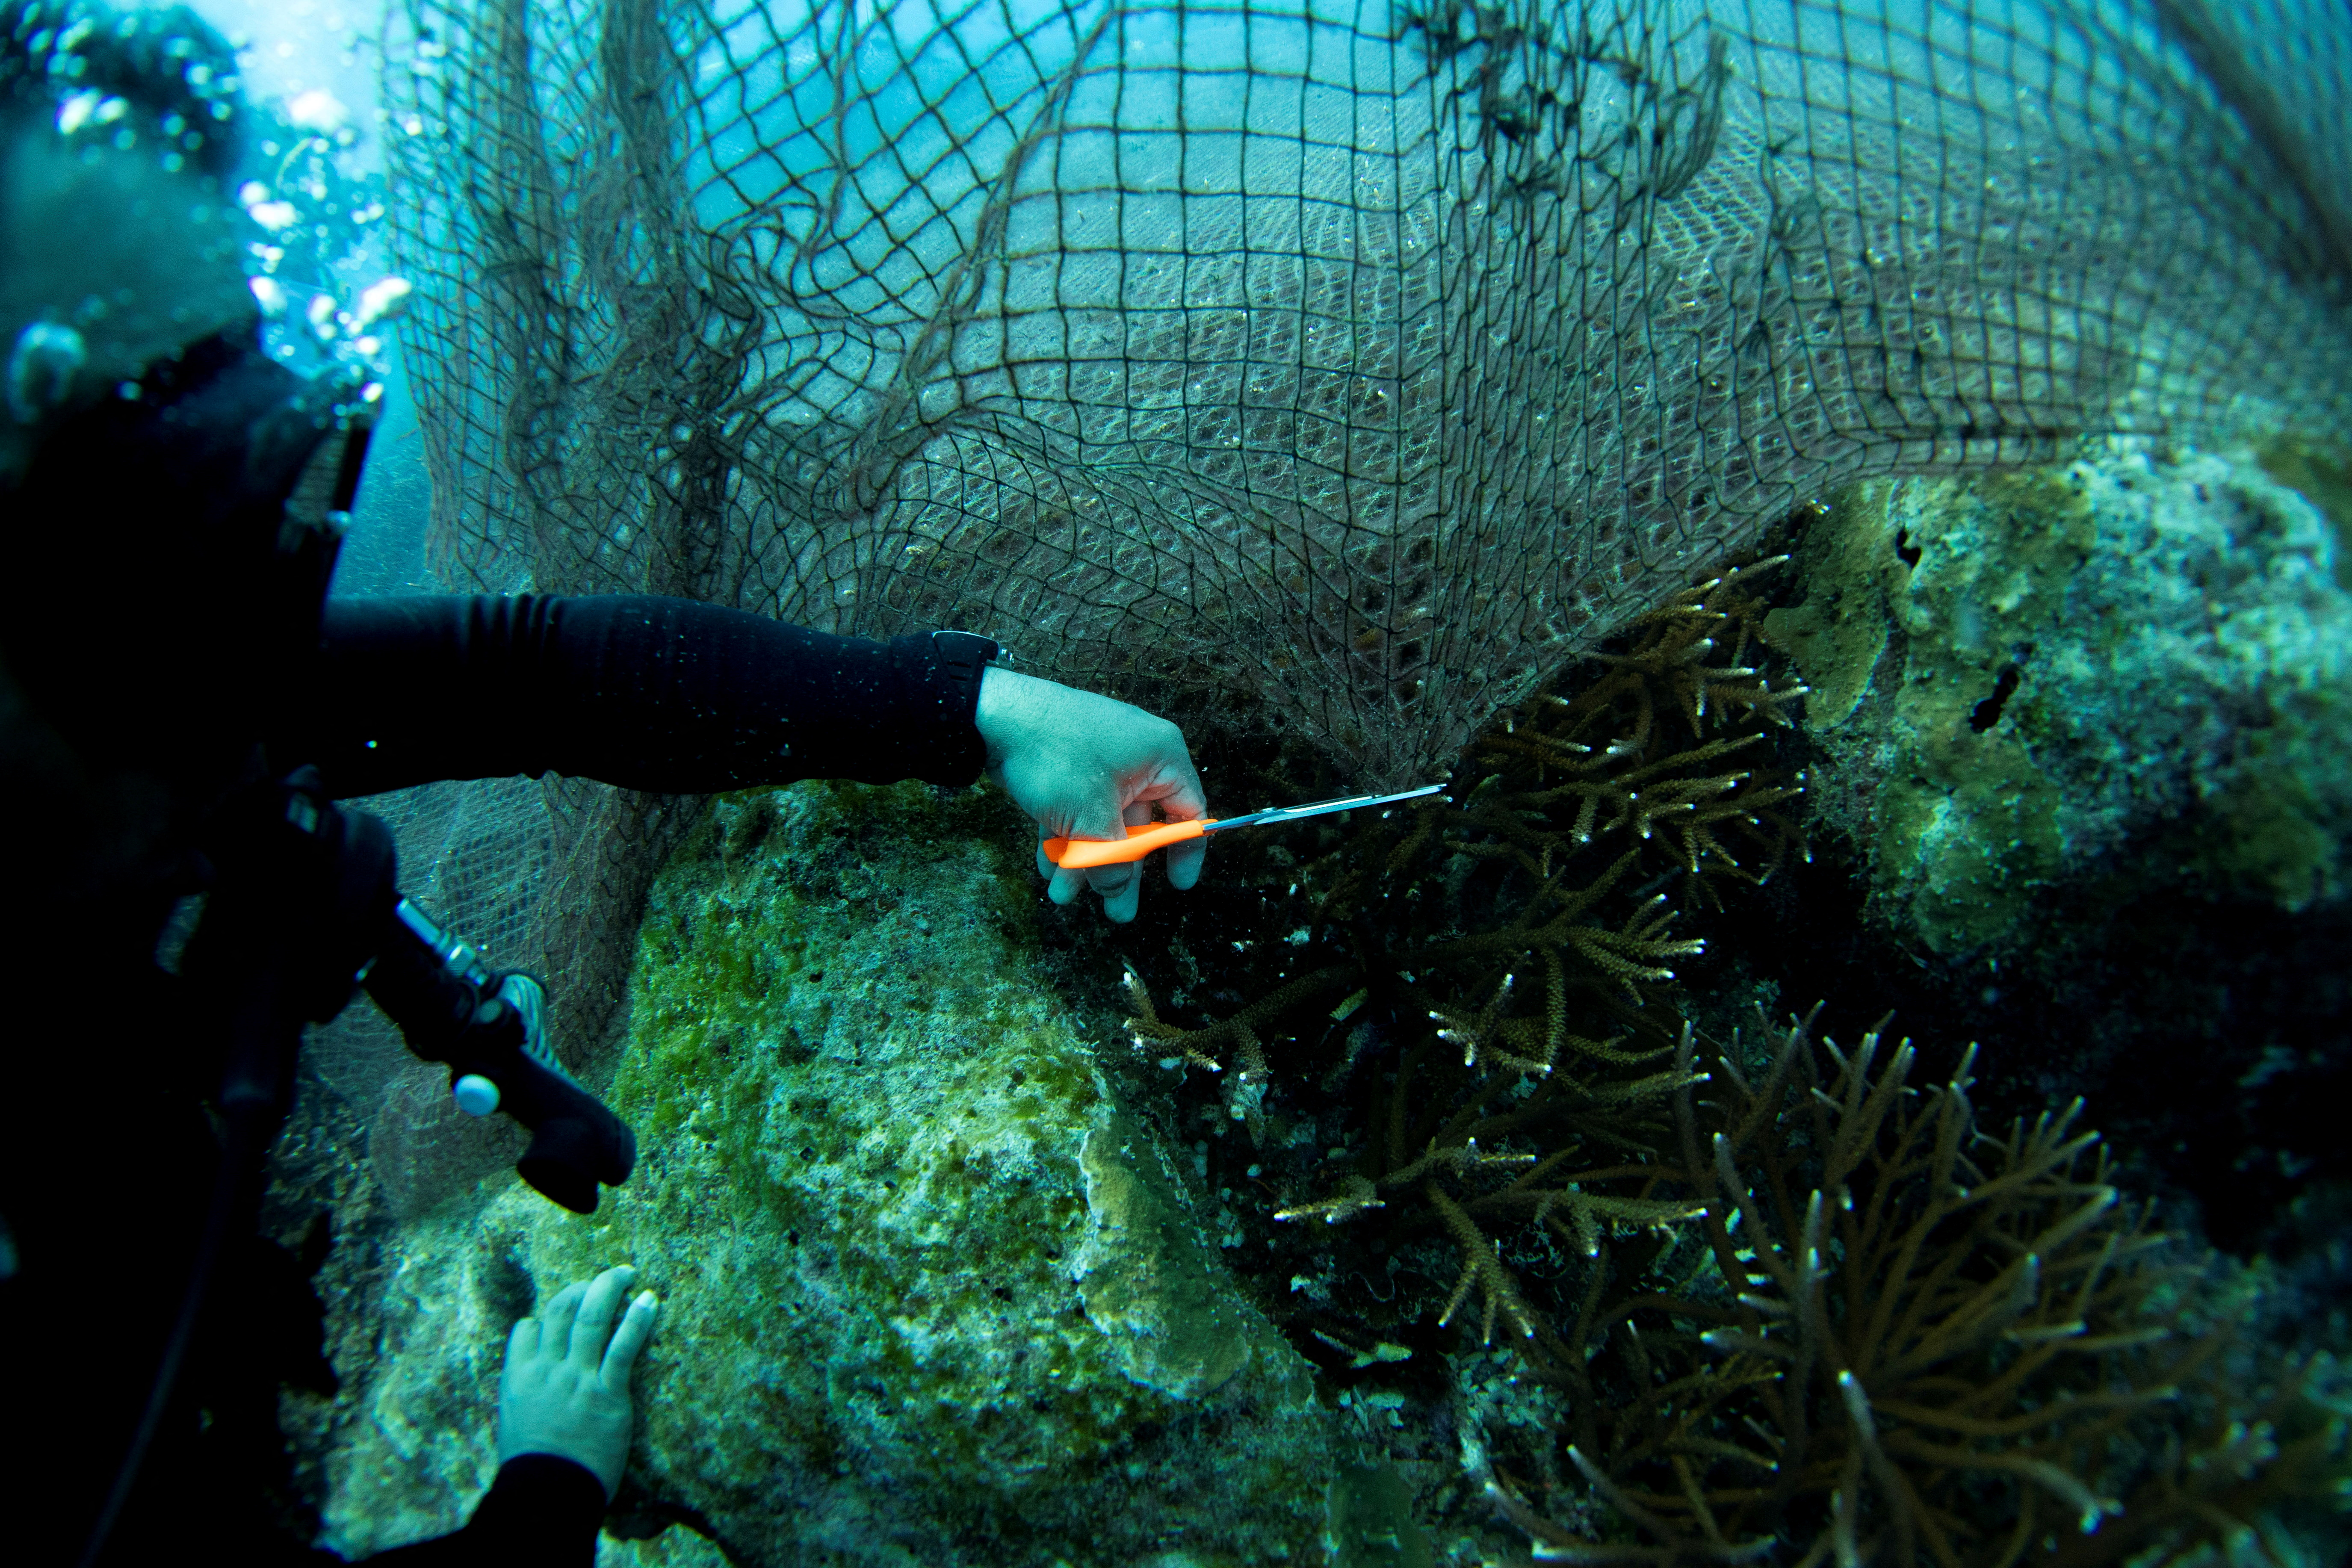 Divers take out of the sea an abandoned fishing net that was covering a coral reef in a protected area of Ko Losin